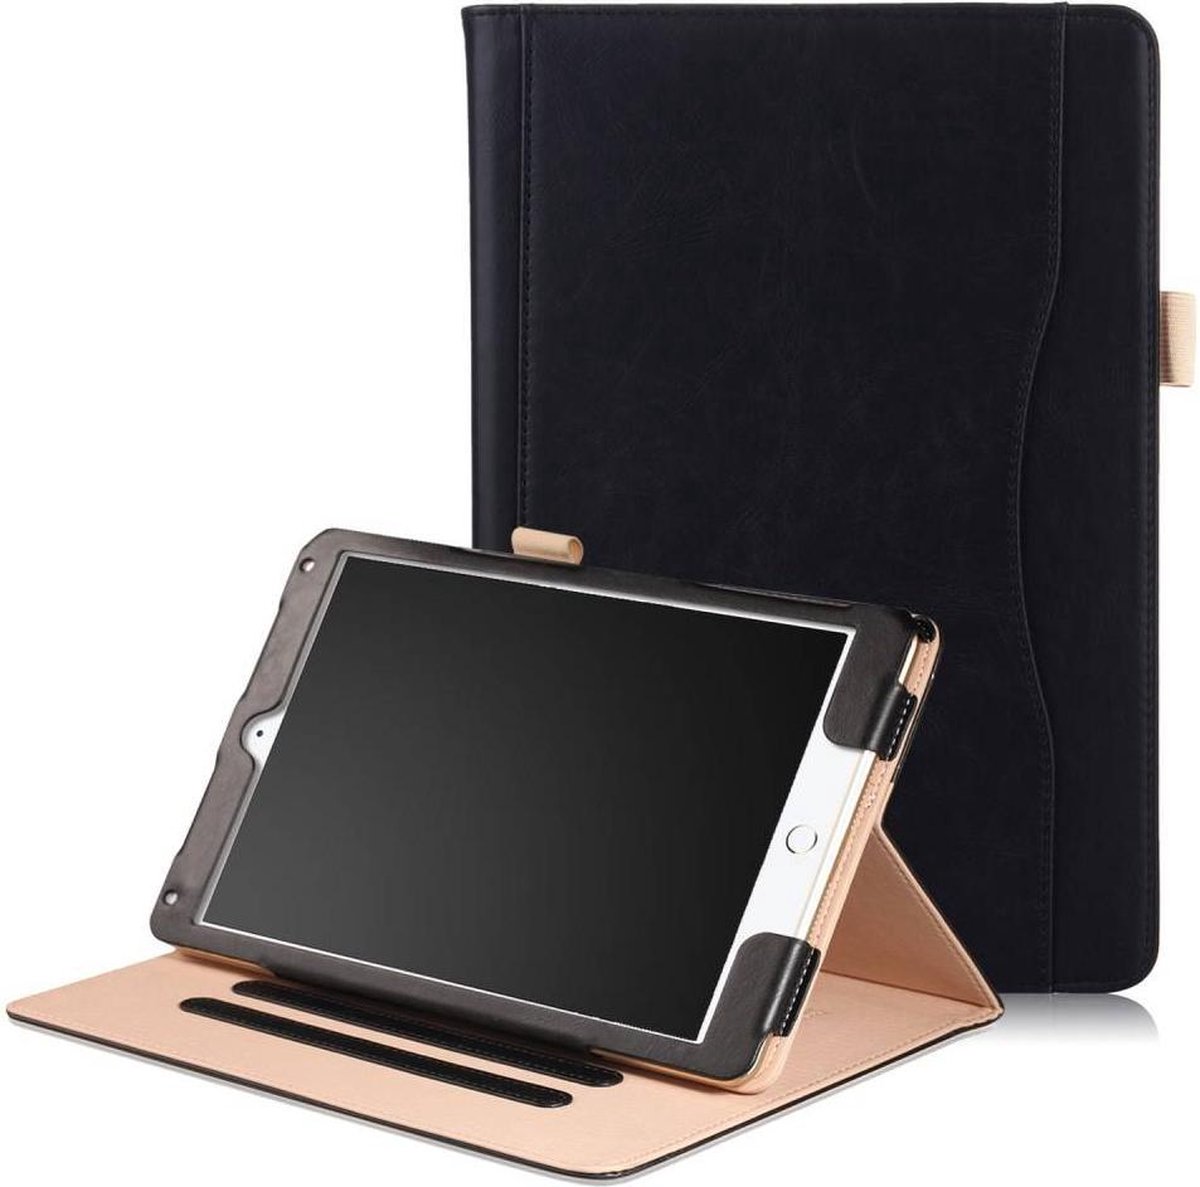 Luxe stand flip hoes iPad Pro 10.5 inch / Air (2019) 10.5 inch zwart